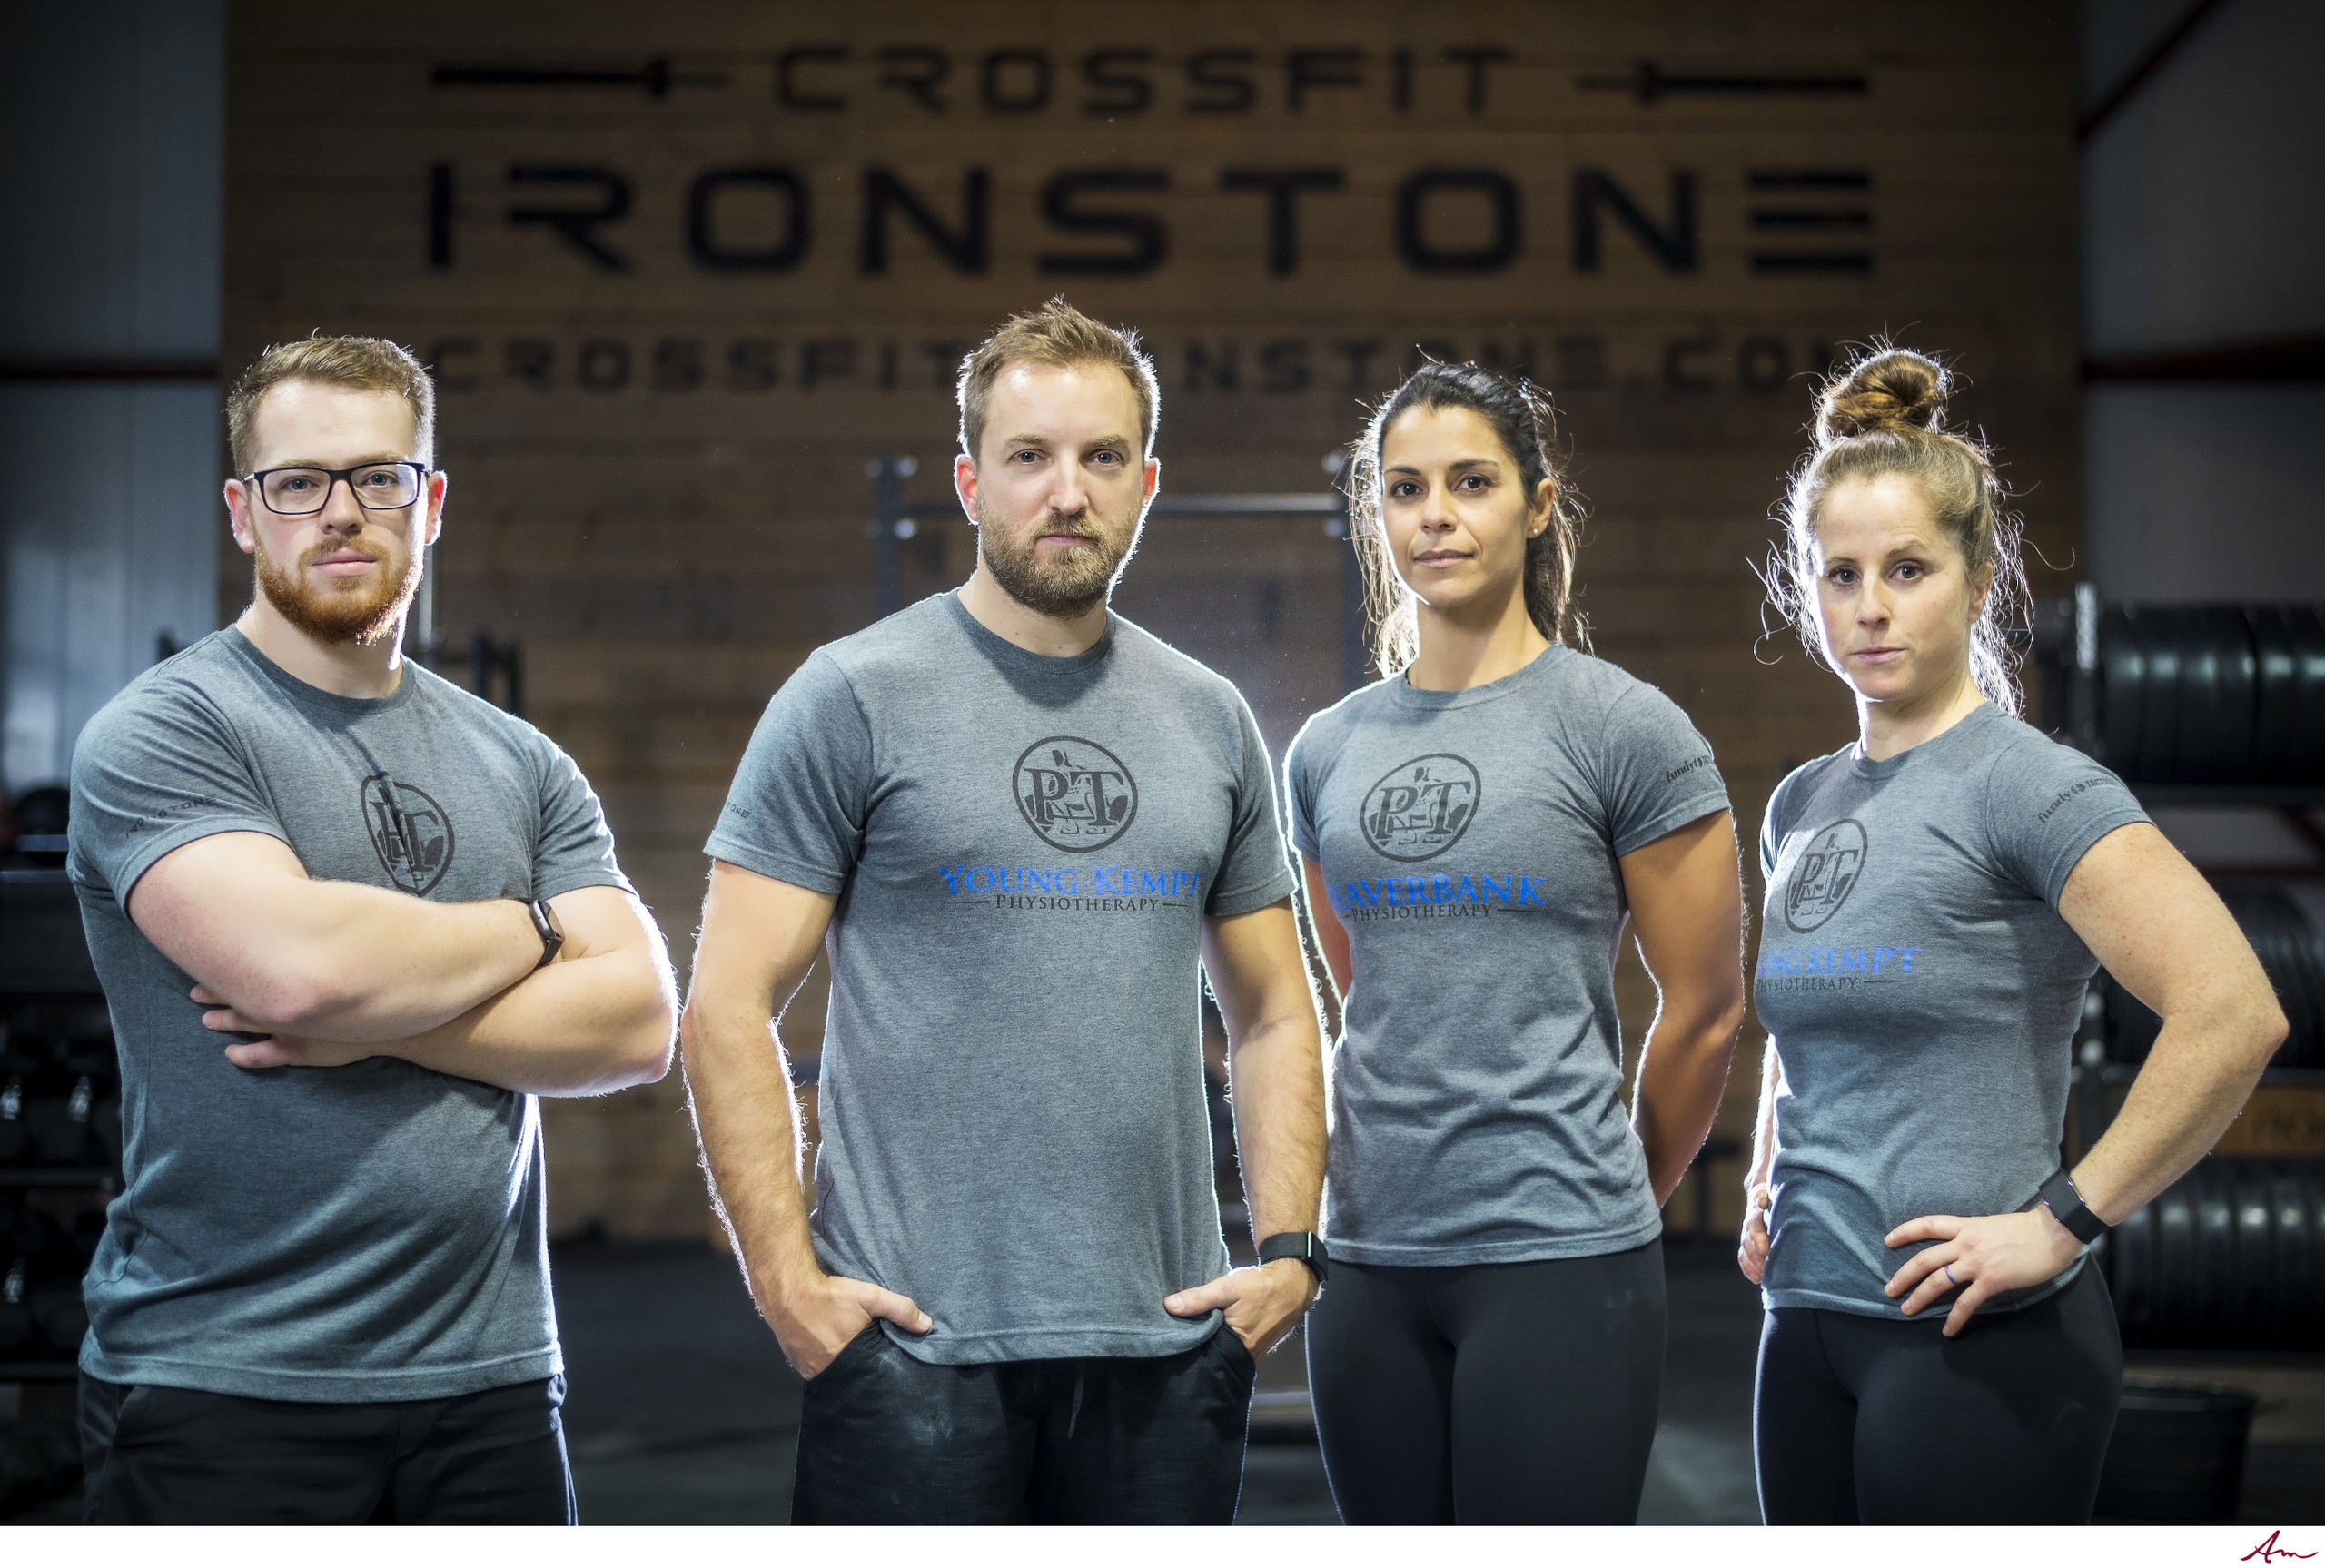 CrossFit specialist team from Young Kempt Physiotherapy - Corporate ...